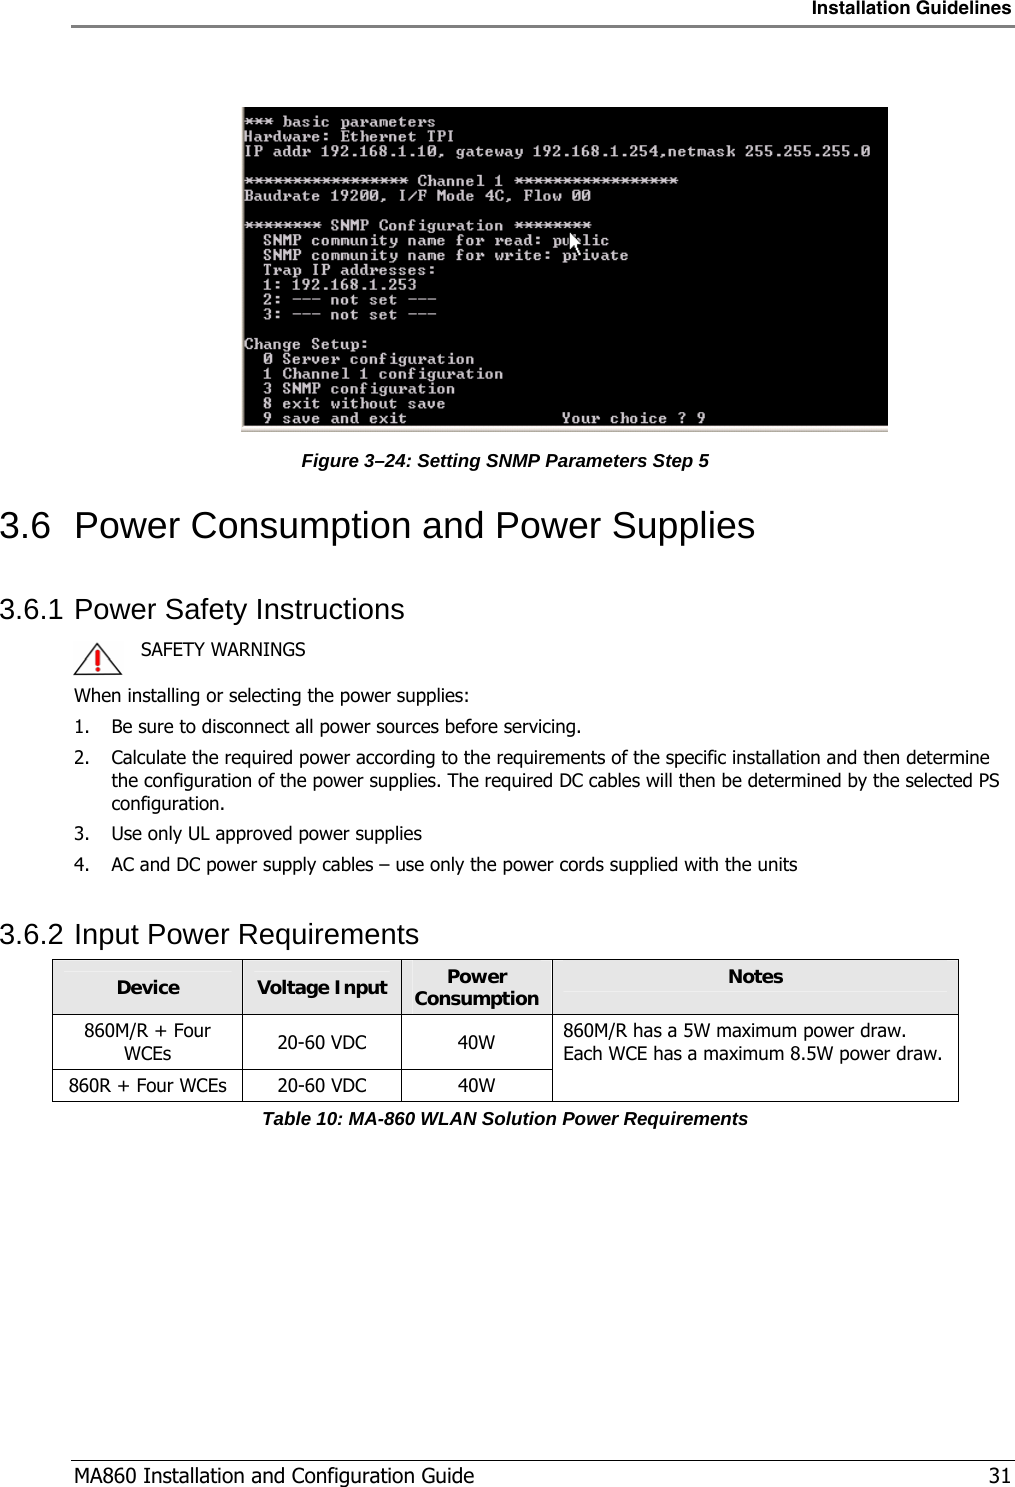 Installation Guidelines  MA860 Installation and Configuration Guide   31   Figure  3–24: Setting SNMP Parameters Step 5 3.6  Power Consumption and Power Supplies 3.6.1 Power Safety Instructions    SAFETY WARNINGS When installing or selecting the power supplies:   1. Be sure to disconnect all power sources before servicing. 2. Calculate the required power according to the requirements of the specific installation and then determine the configuration of the power supplies. The required DC cables will then be determined by the selected PS configuration. 3. Use only UL approved power supplies  4. AC and DC power supply cables – use only the power cords supplied with the units  3.6.2 Input Power Requirements Device  Voltage Input  Power Consumption  Notes 860M/R + Four WCEs  20-60 VDC  40W 860R + Four WCEs  20-60 VDC  40W 860M/R has a 5W maximum power draw.  Each WCE has a maximum 8.5W power draw. Table 10: MA-860 WLAN Solution Power Requirements 